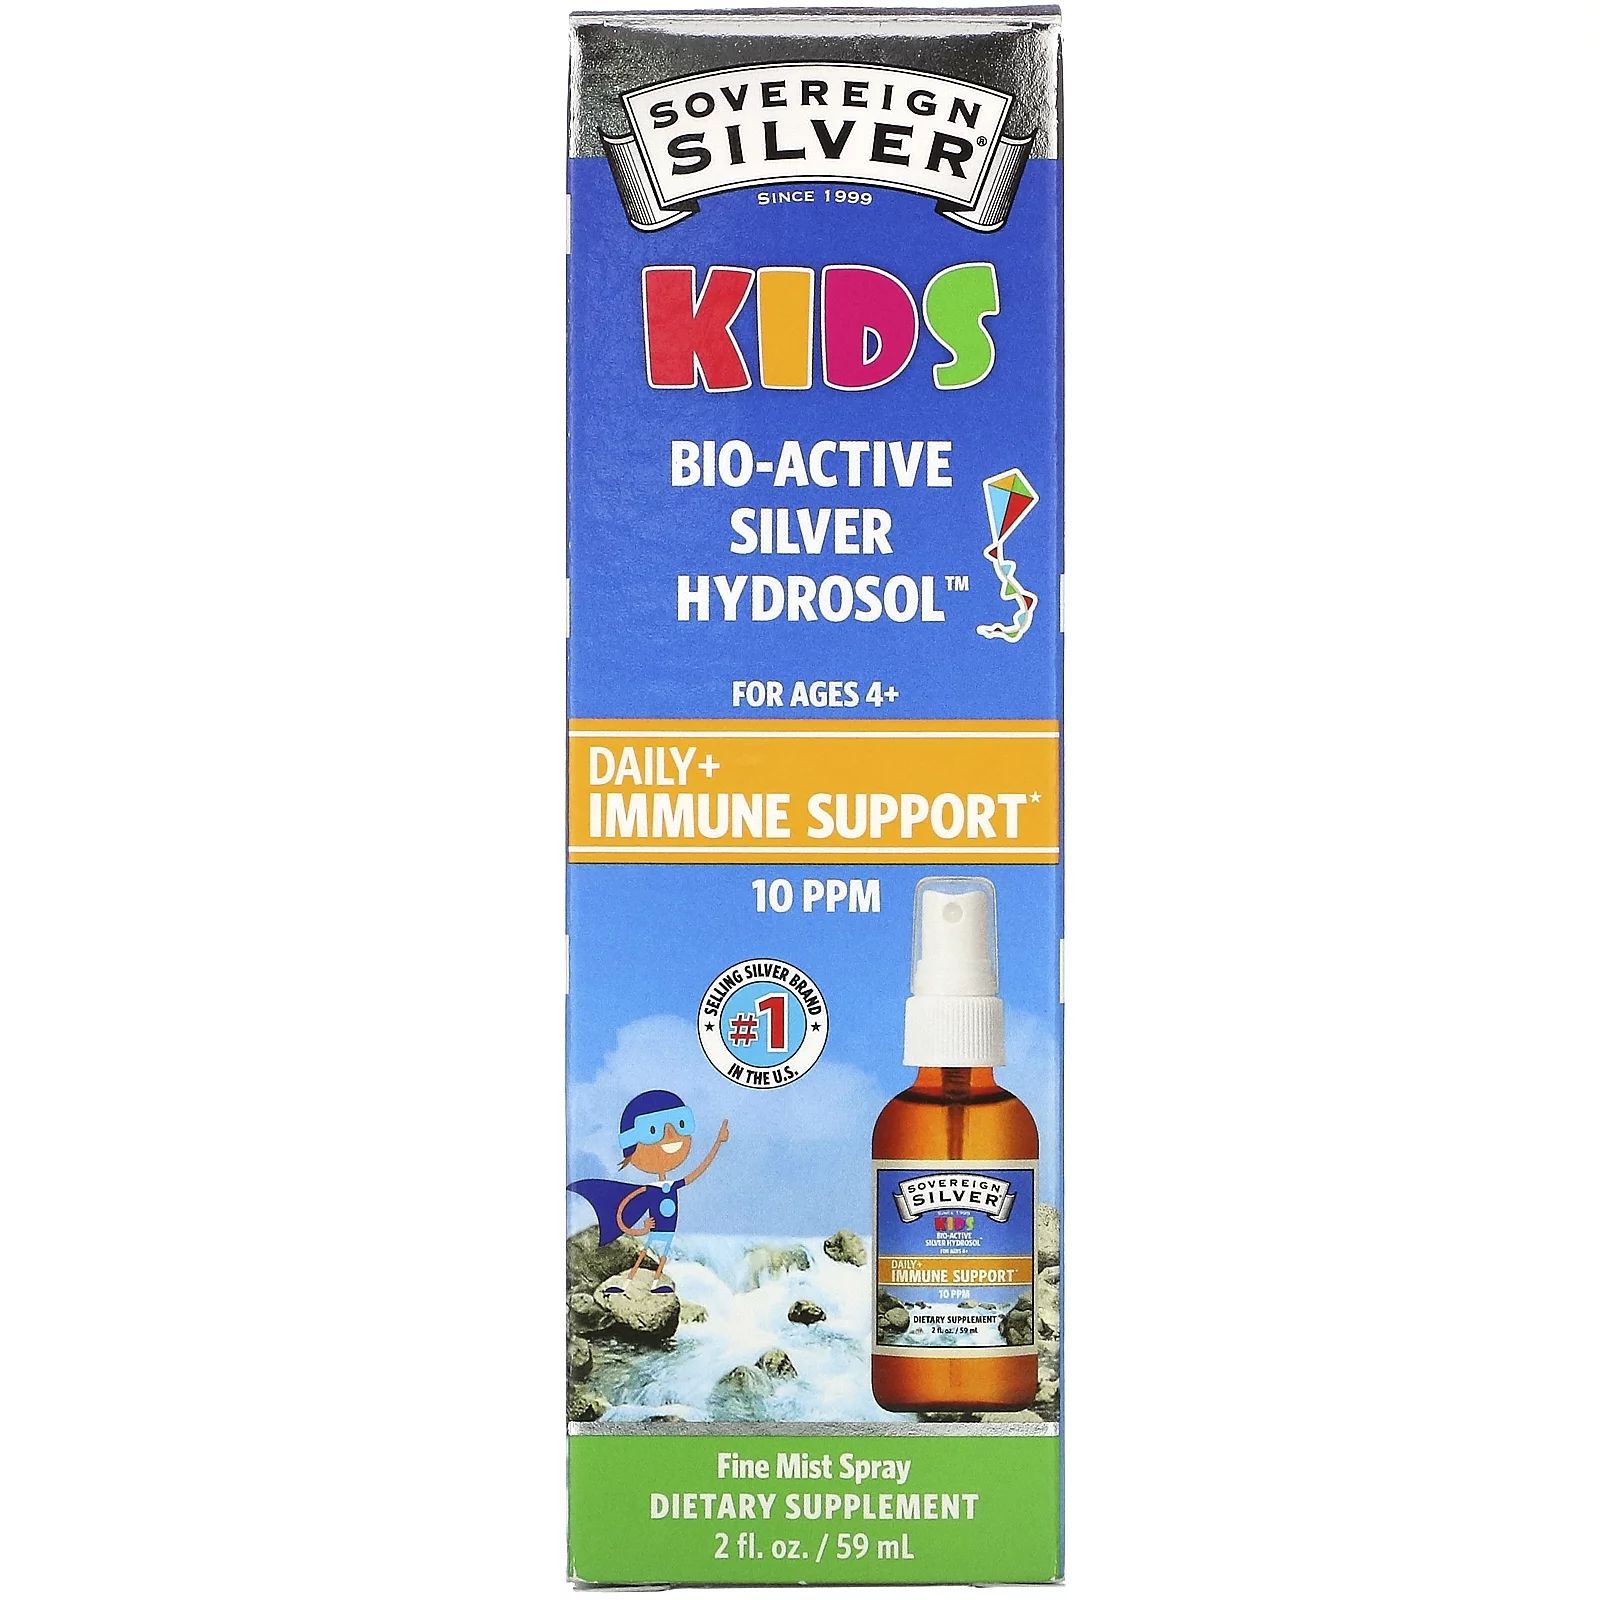 Sovereign Silver Kids Bio-Active Silver Hydrosol, Daily Immune Support Spray, Ages 4+, 10 PPM, 2 ... | Walmart (US)